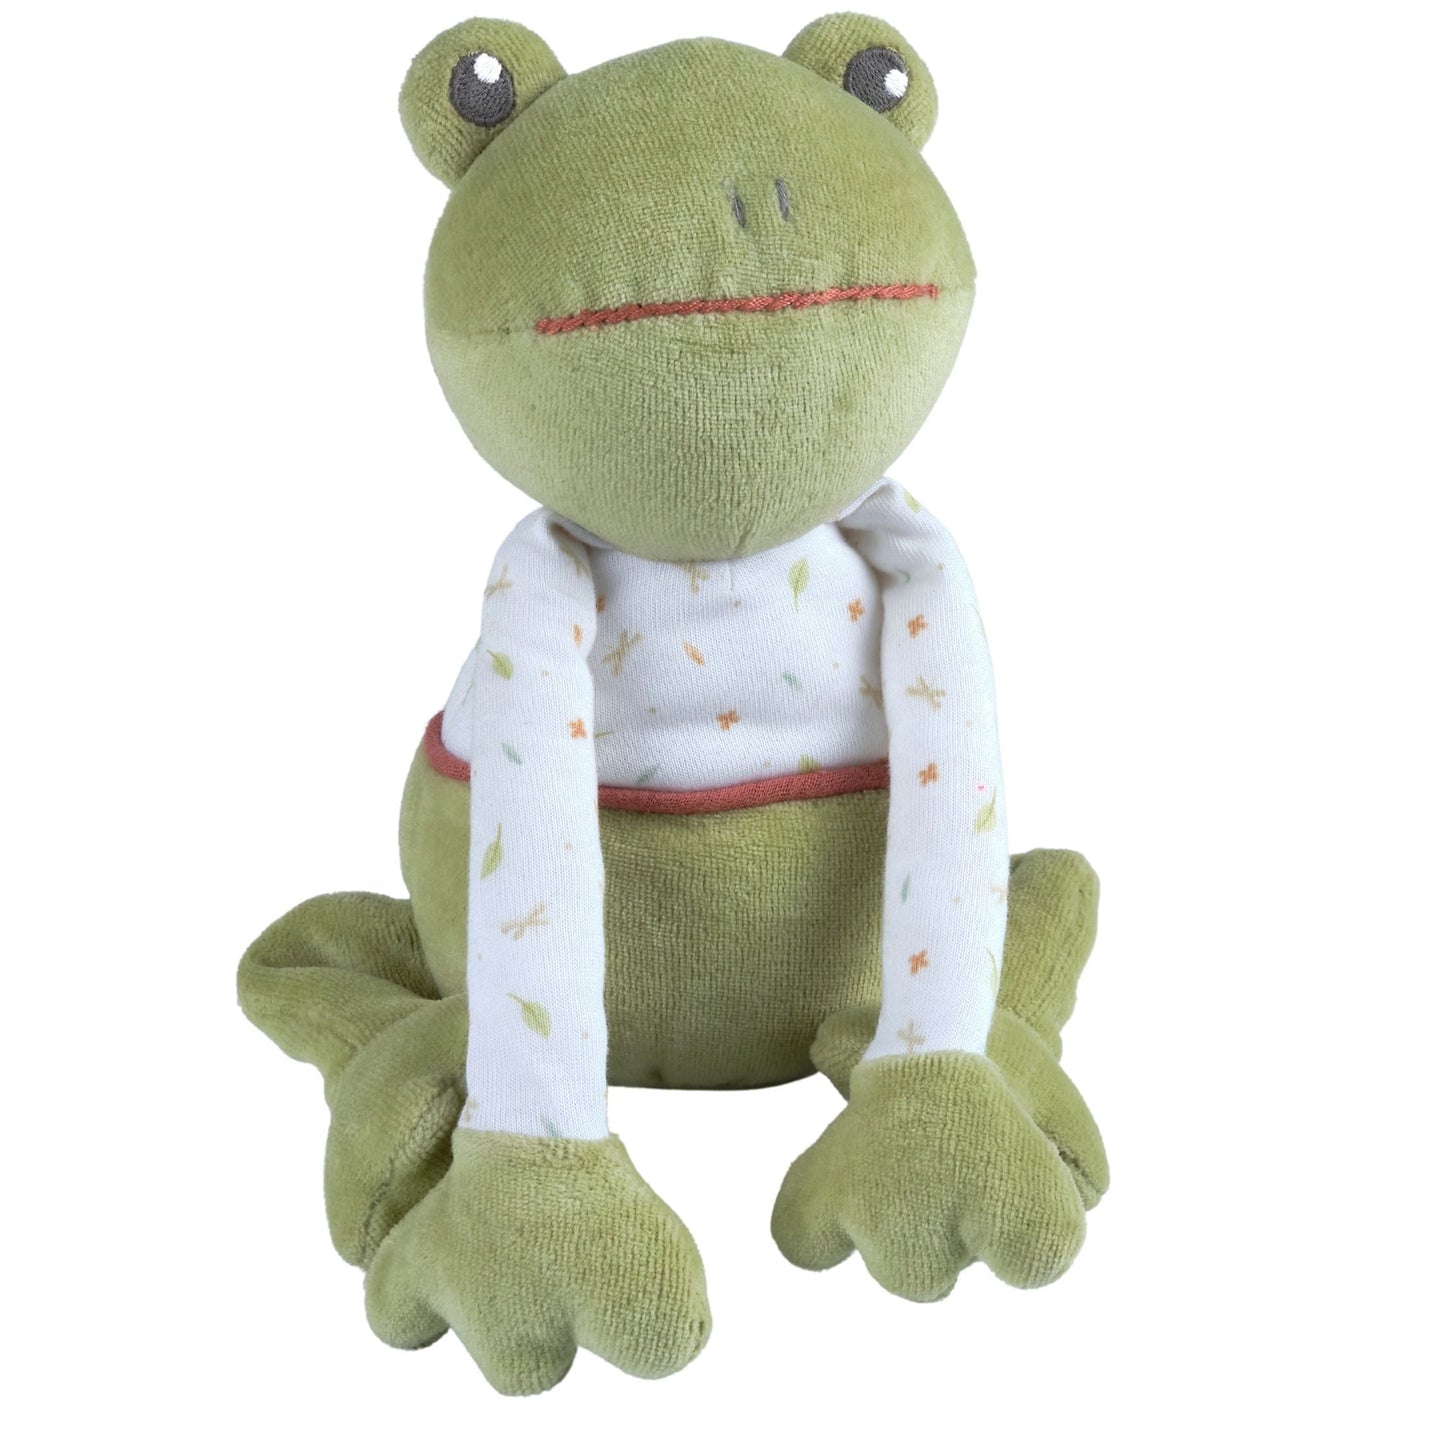 Gemba the Frog Organic Soft Toy